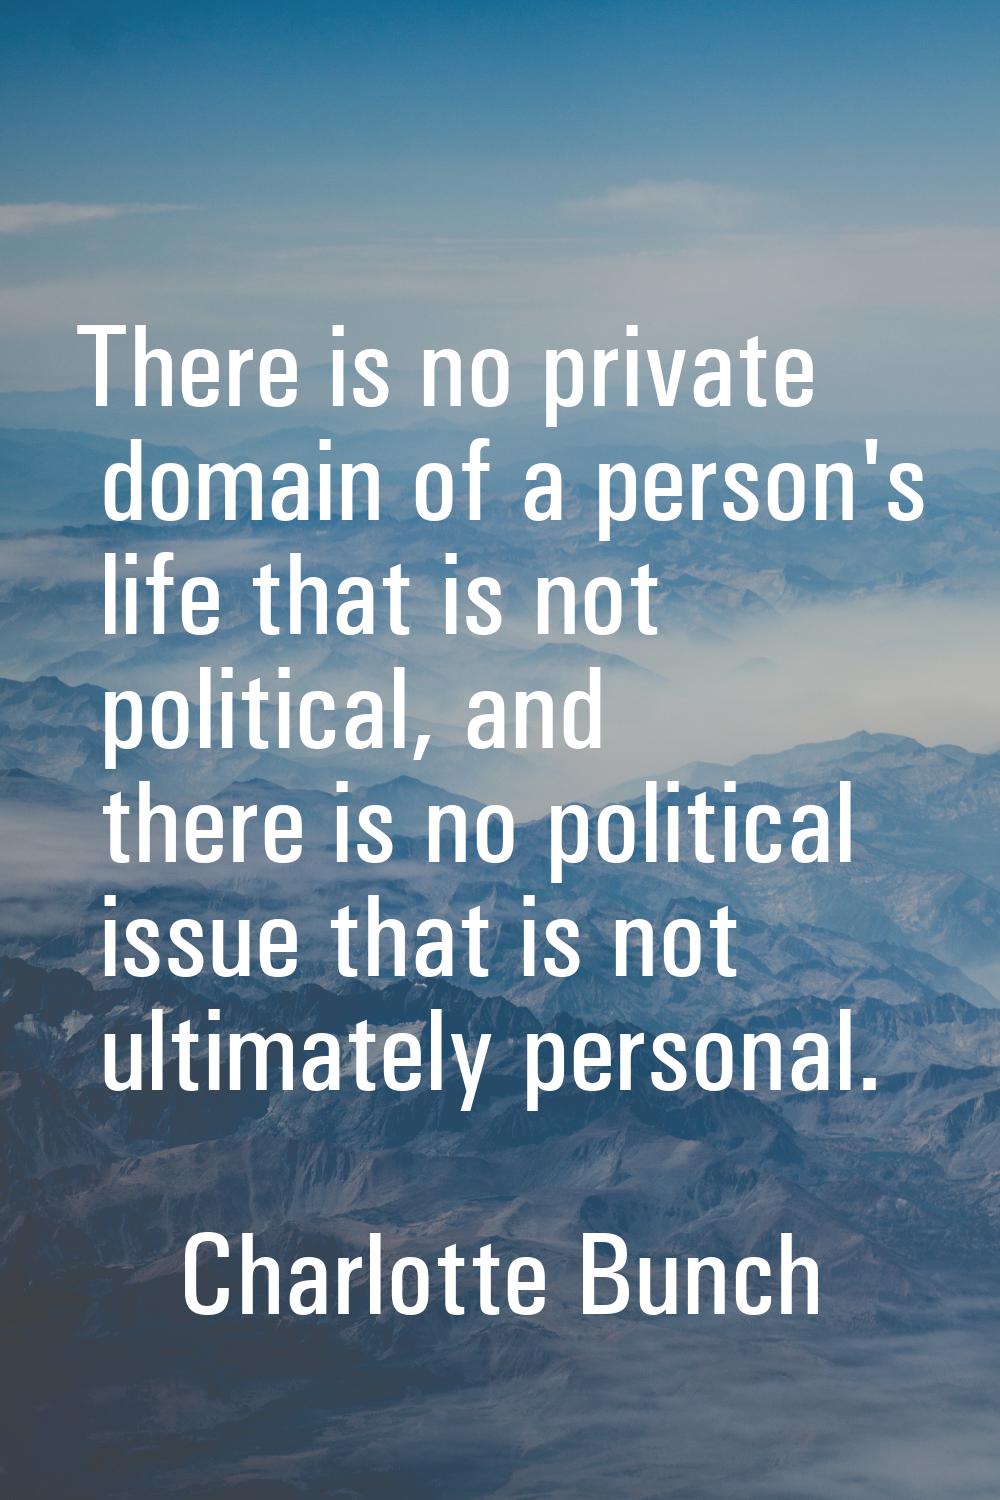 There is no private domain of a person's life that is not political, and there is no political issu